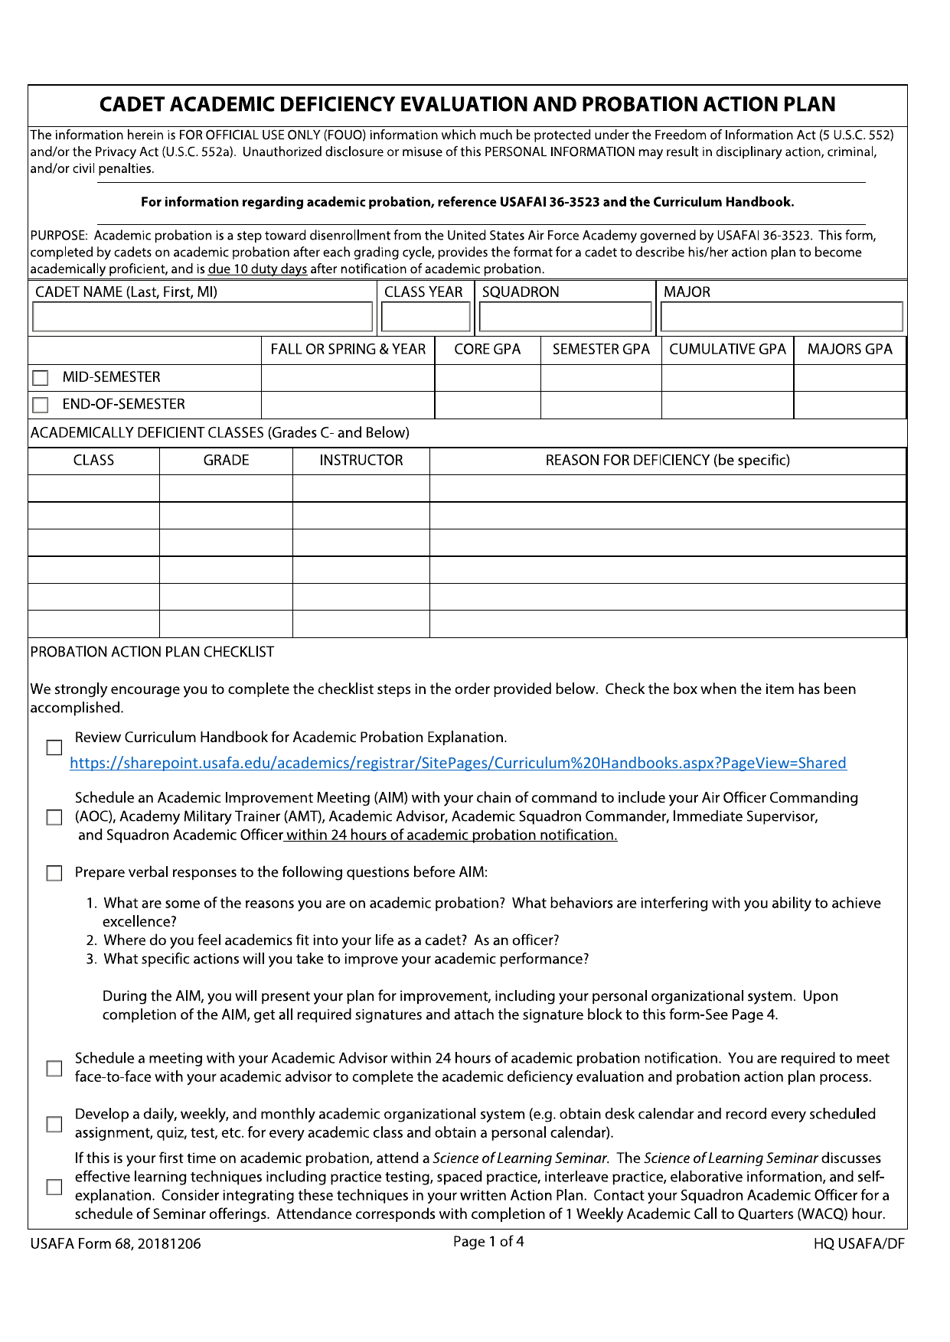 USAFA Form 68 Cadet Academic Deficiency Evaluation and Probation Action Plan, Page 1